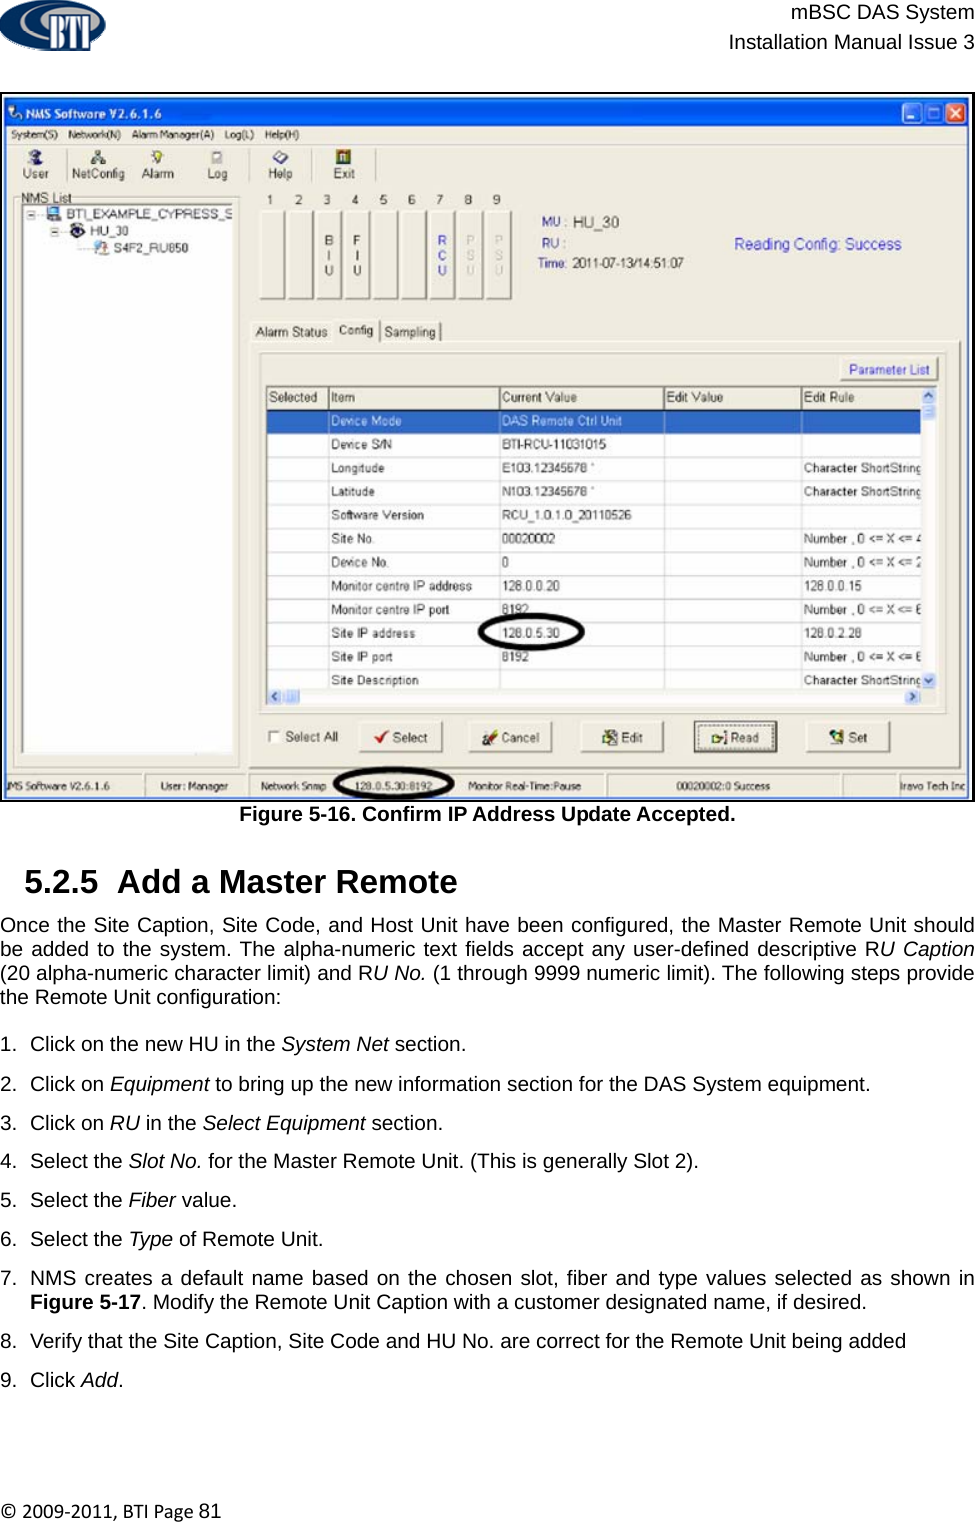                          mBSC DAS System  Installation Manual Issue 3  ©2009‐2011,BTIPage81  Figure 5-16. Confirm IP Address Update Accepted.   5.2.5  Add a Master Remote Once the Site Caption, Site Code, and Host Unit have been configured, the Master Remote Unit should be added to the system. The alpha-numeric text fields accept any user-defined descriptive RU Caption (20 alpha-numeric character limit) and RU No. (1 through 9999 numeric limit). The following steps provide the Remote Unit configuration:  1.  Click on the new HU in the System Net section. 2. Click on Equipment to bring up the new information section for the DAS System equipment. 3. Click on RU in the Select Equipment section.  4. Select the Slot No. for the Master Remote Unit. (This is generally Slot 2). 5. Select the Fiber value. 6. Select the Type of Remote Unit. 7.  NMS creates a default name based on the chosen slot, fiber and type values selected as shown in Figure 5-17. Modify the Remote Unit Caption with a customer designated name, if desired. 8.  Verify that the Site Caption, Site Code and HU No. are correct for the Remote Unit being added  9. Click Add.  